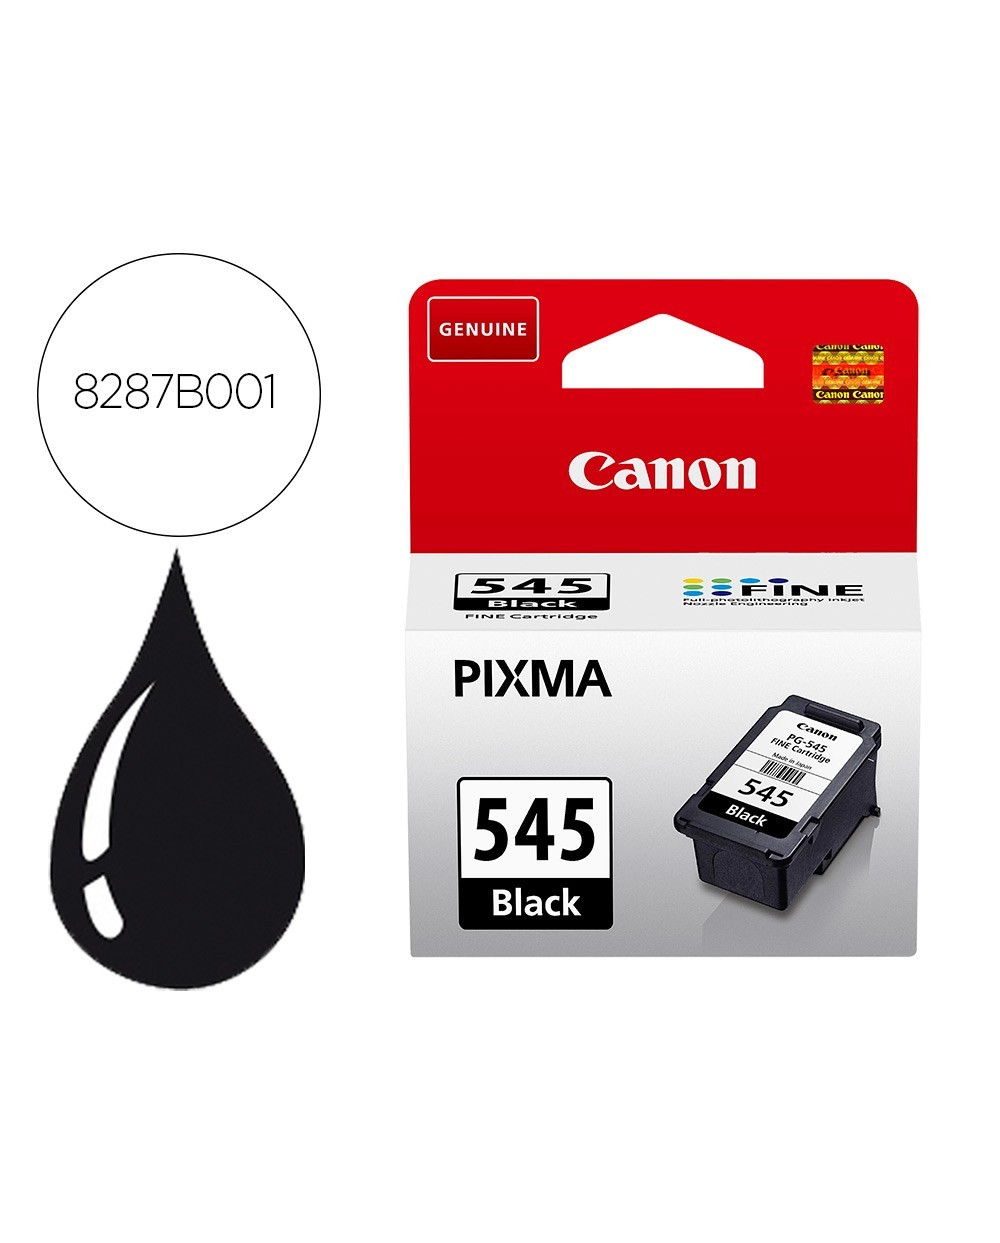 Ink jet canon pg 545 negro mg 2450 2550